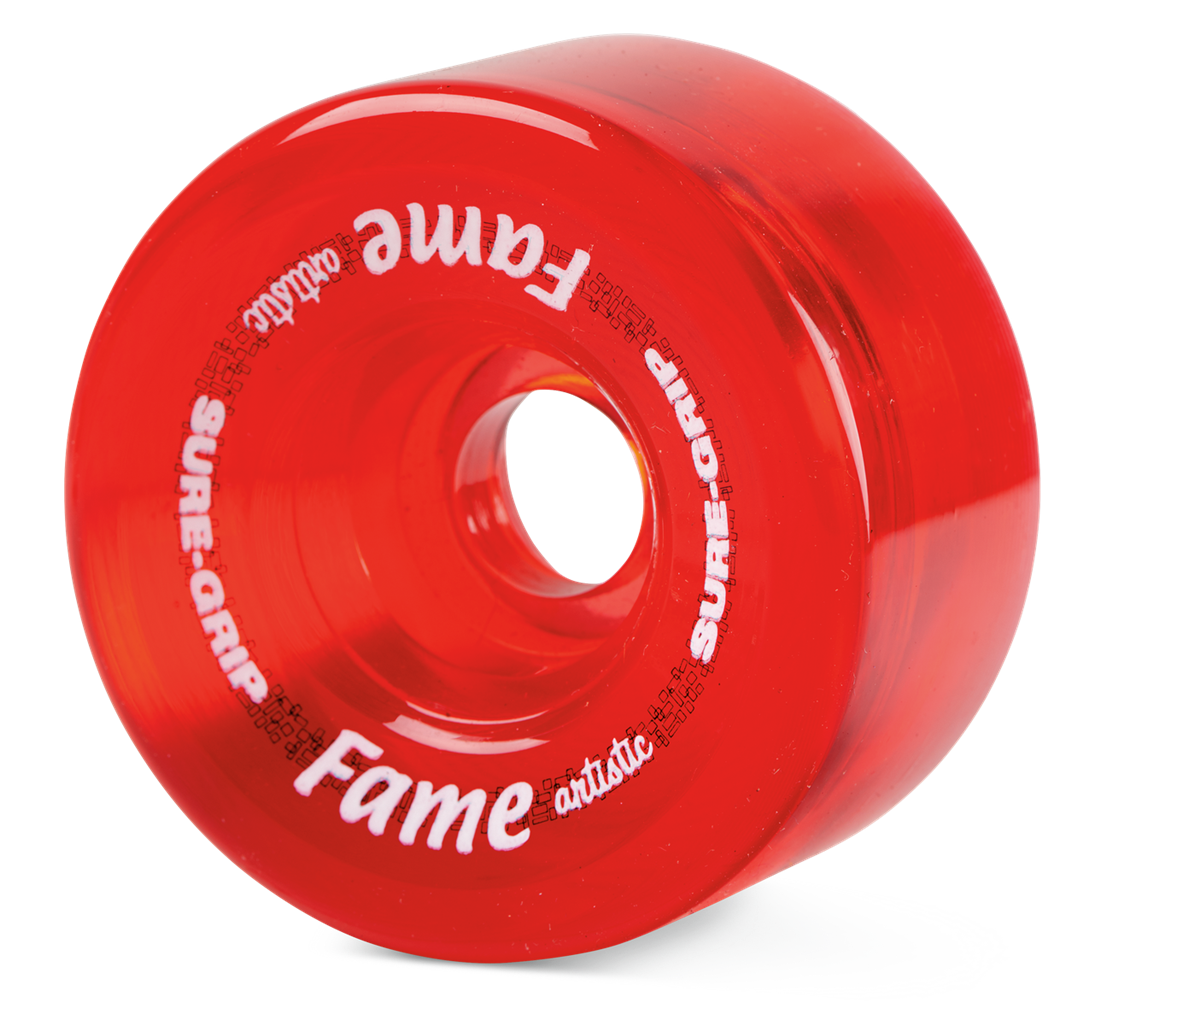 Sure-Grip Fame Artistic 95a 57mm (Set of 8) Clear Red Roller Skate Wheels